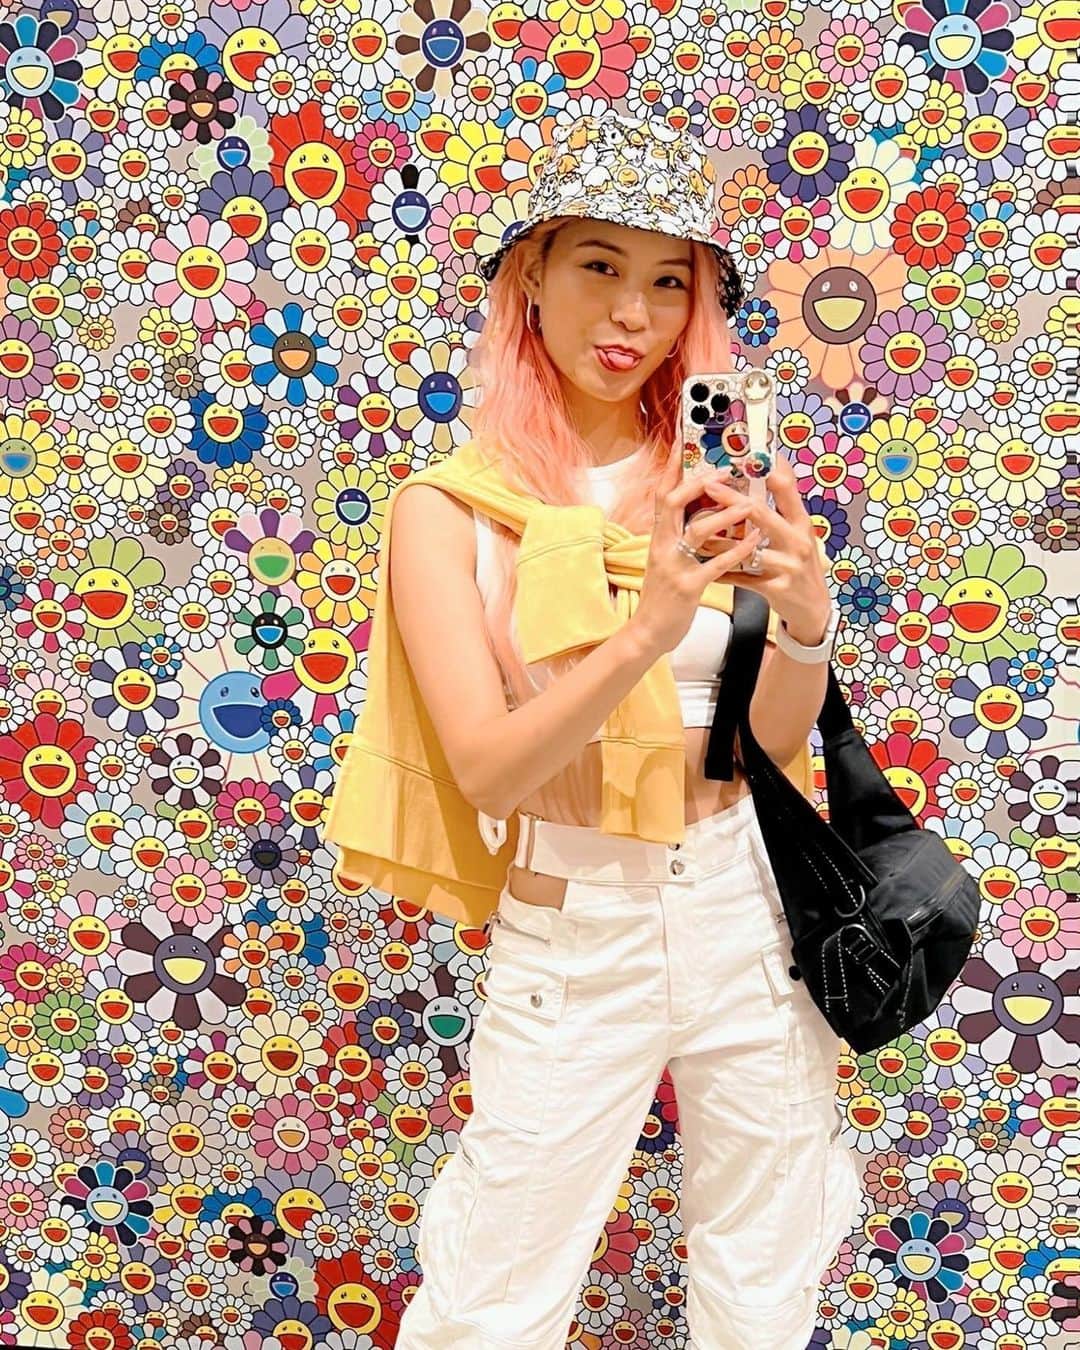 Yukiのインスタグラム：「Anyone else a fan of MURAKAMI? I am! Swipe to see some fun 🙃   I took my girl @tokyo_twiggy around LA while she was visiting town. It was fun to just enjoy each other’s company and encouraging each other to rise above 🙌🏻💕   I also had the pleasure of meeting Mr. Bryan of @fugetsudo in Little Tokyo! Such a historic Japanese sweets shop 💕   Lastly, if you know what anime that yellow moped is from, you a real G 😆   @thebroadmuseum @takashipom #murakami #takashimurakami #thebroad #thebroadmuseum #littletokyo #dtla #FLCL #furikuri」